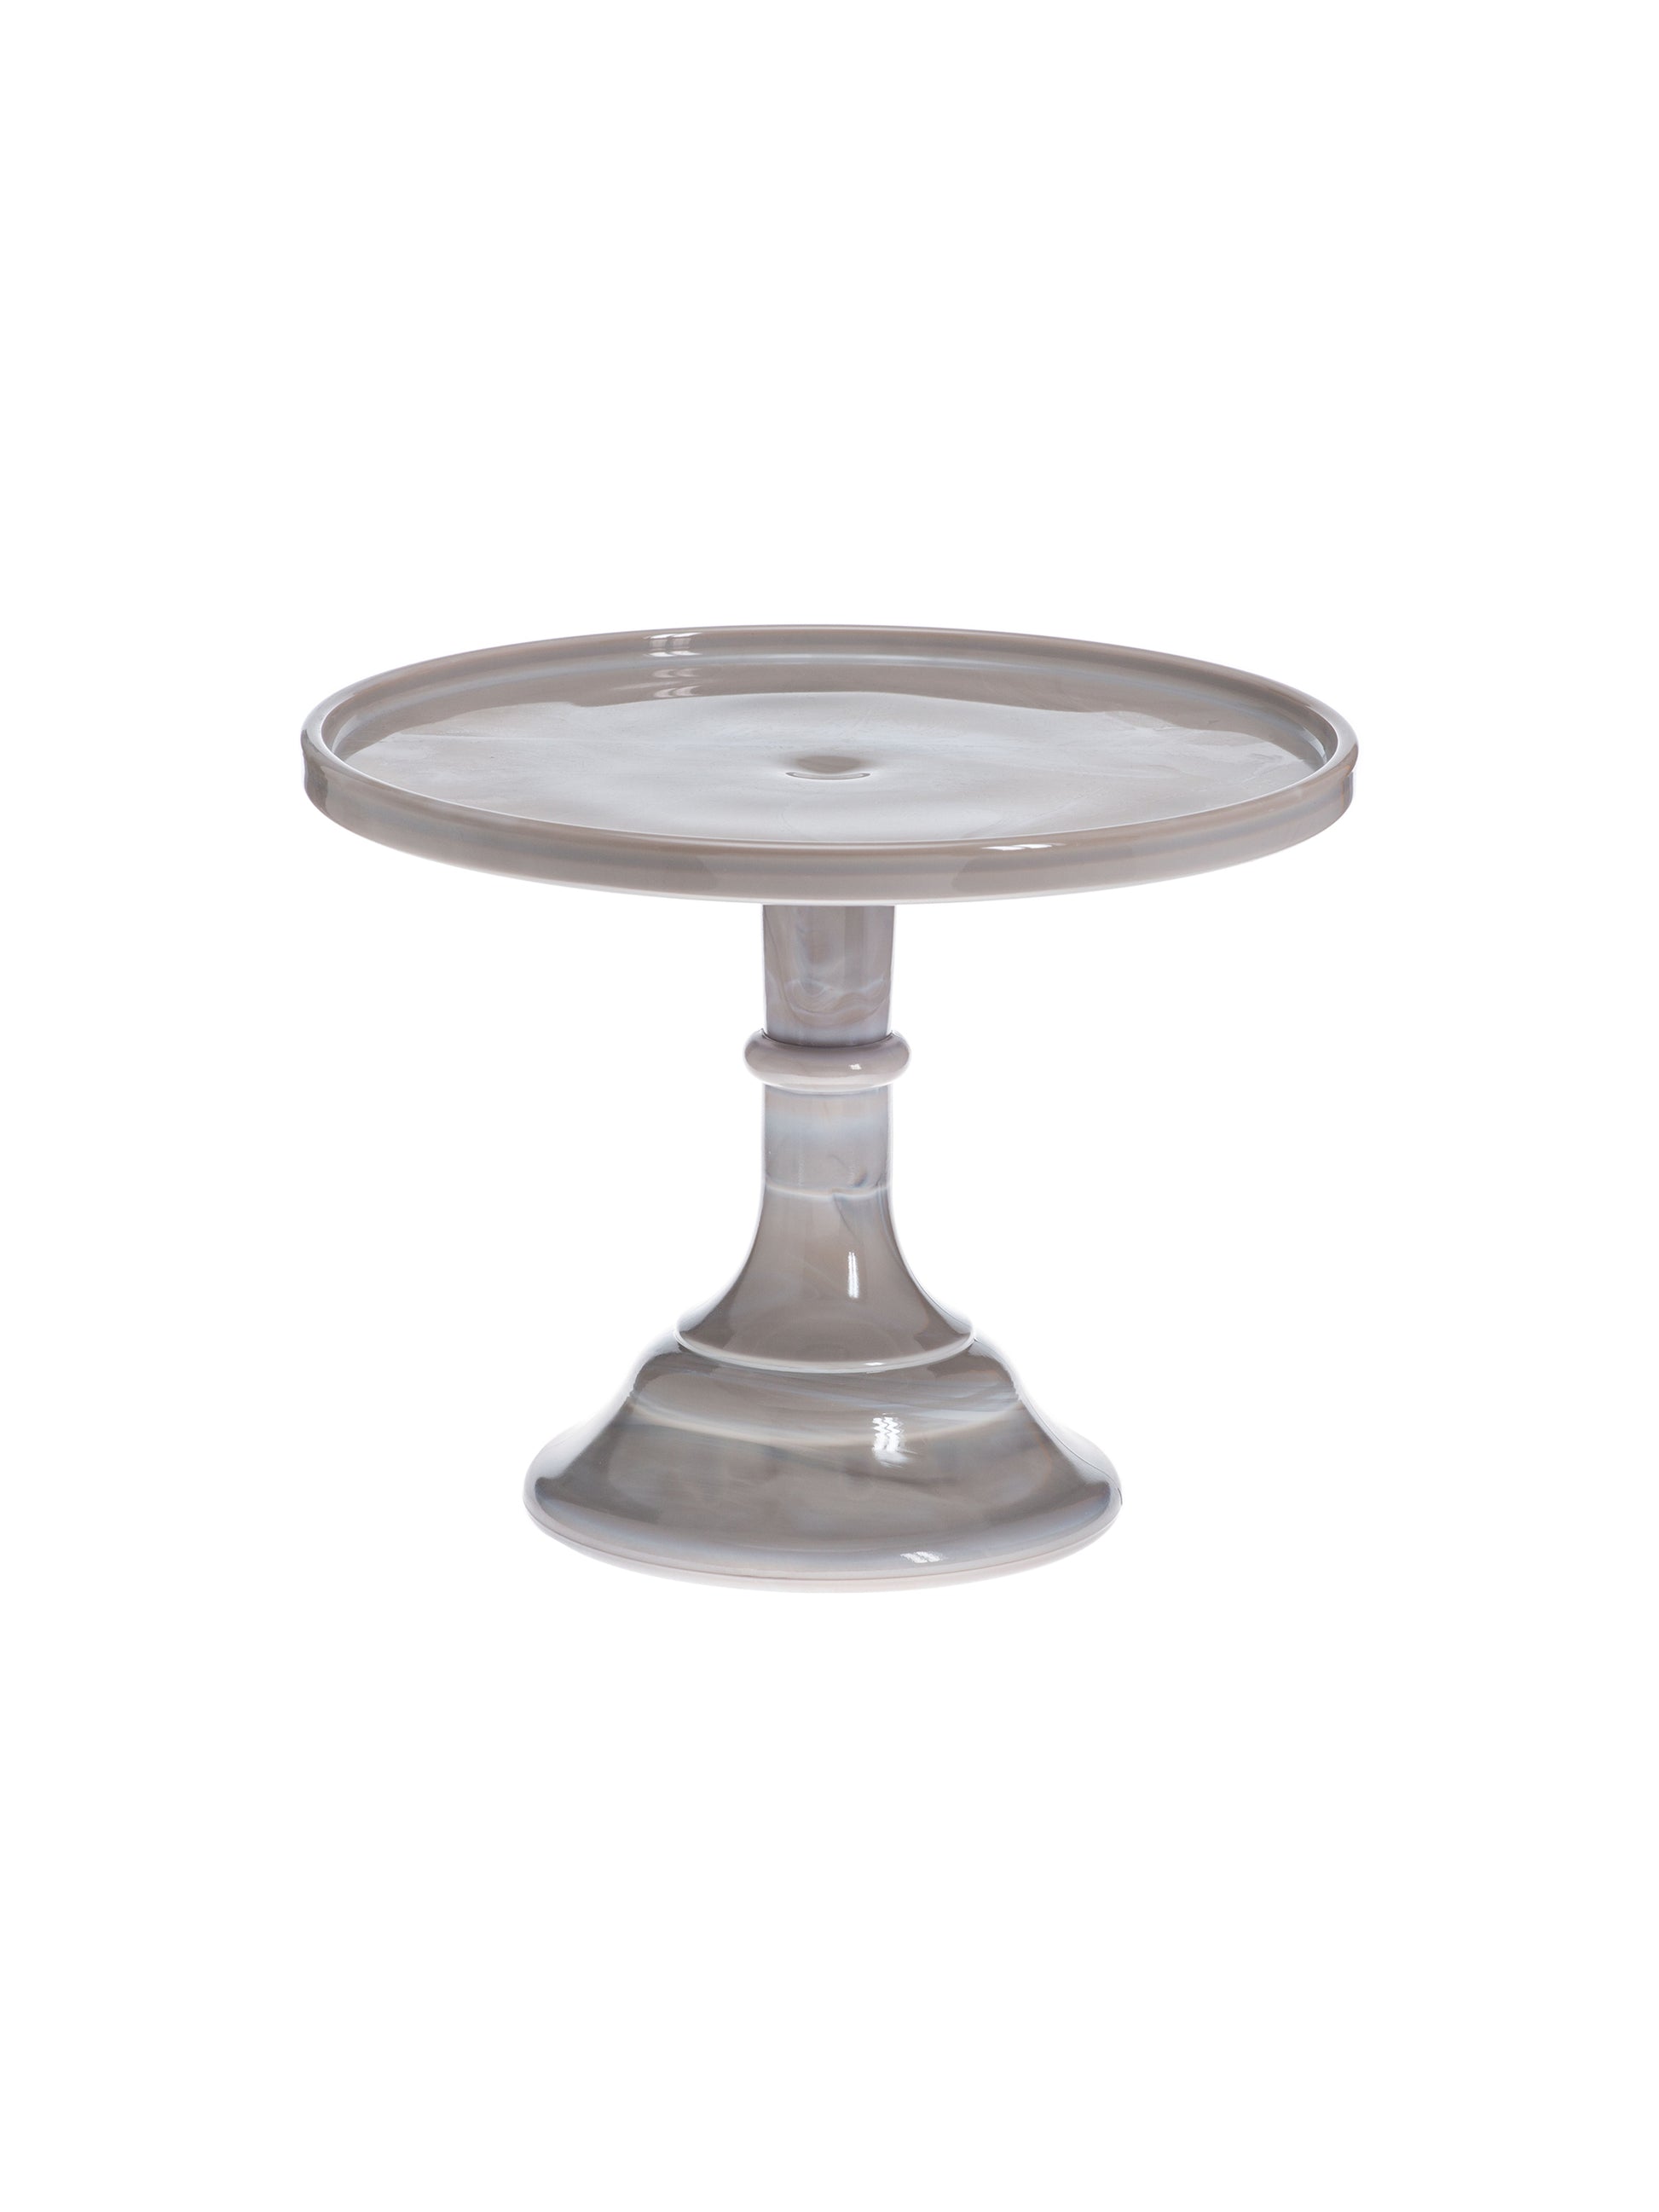 Mosser Marble Cake Stand Weston Table